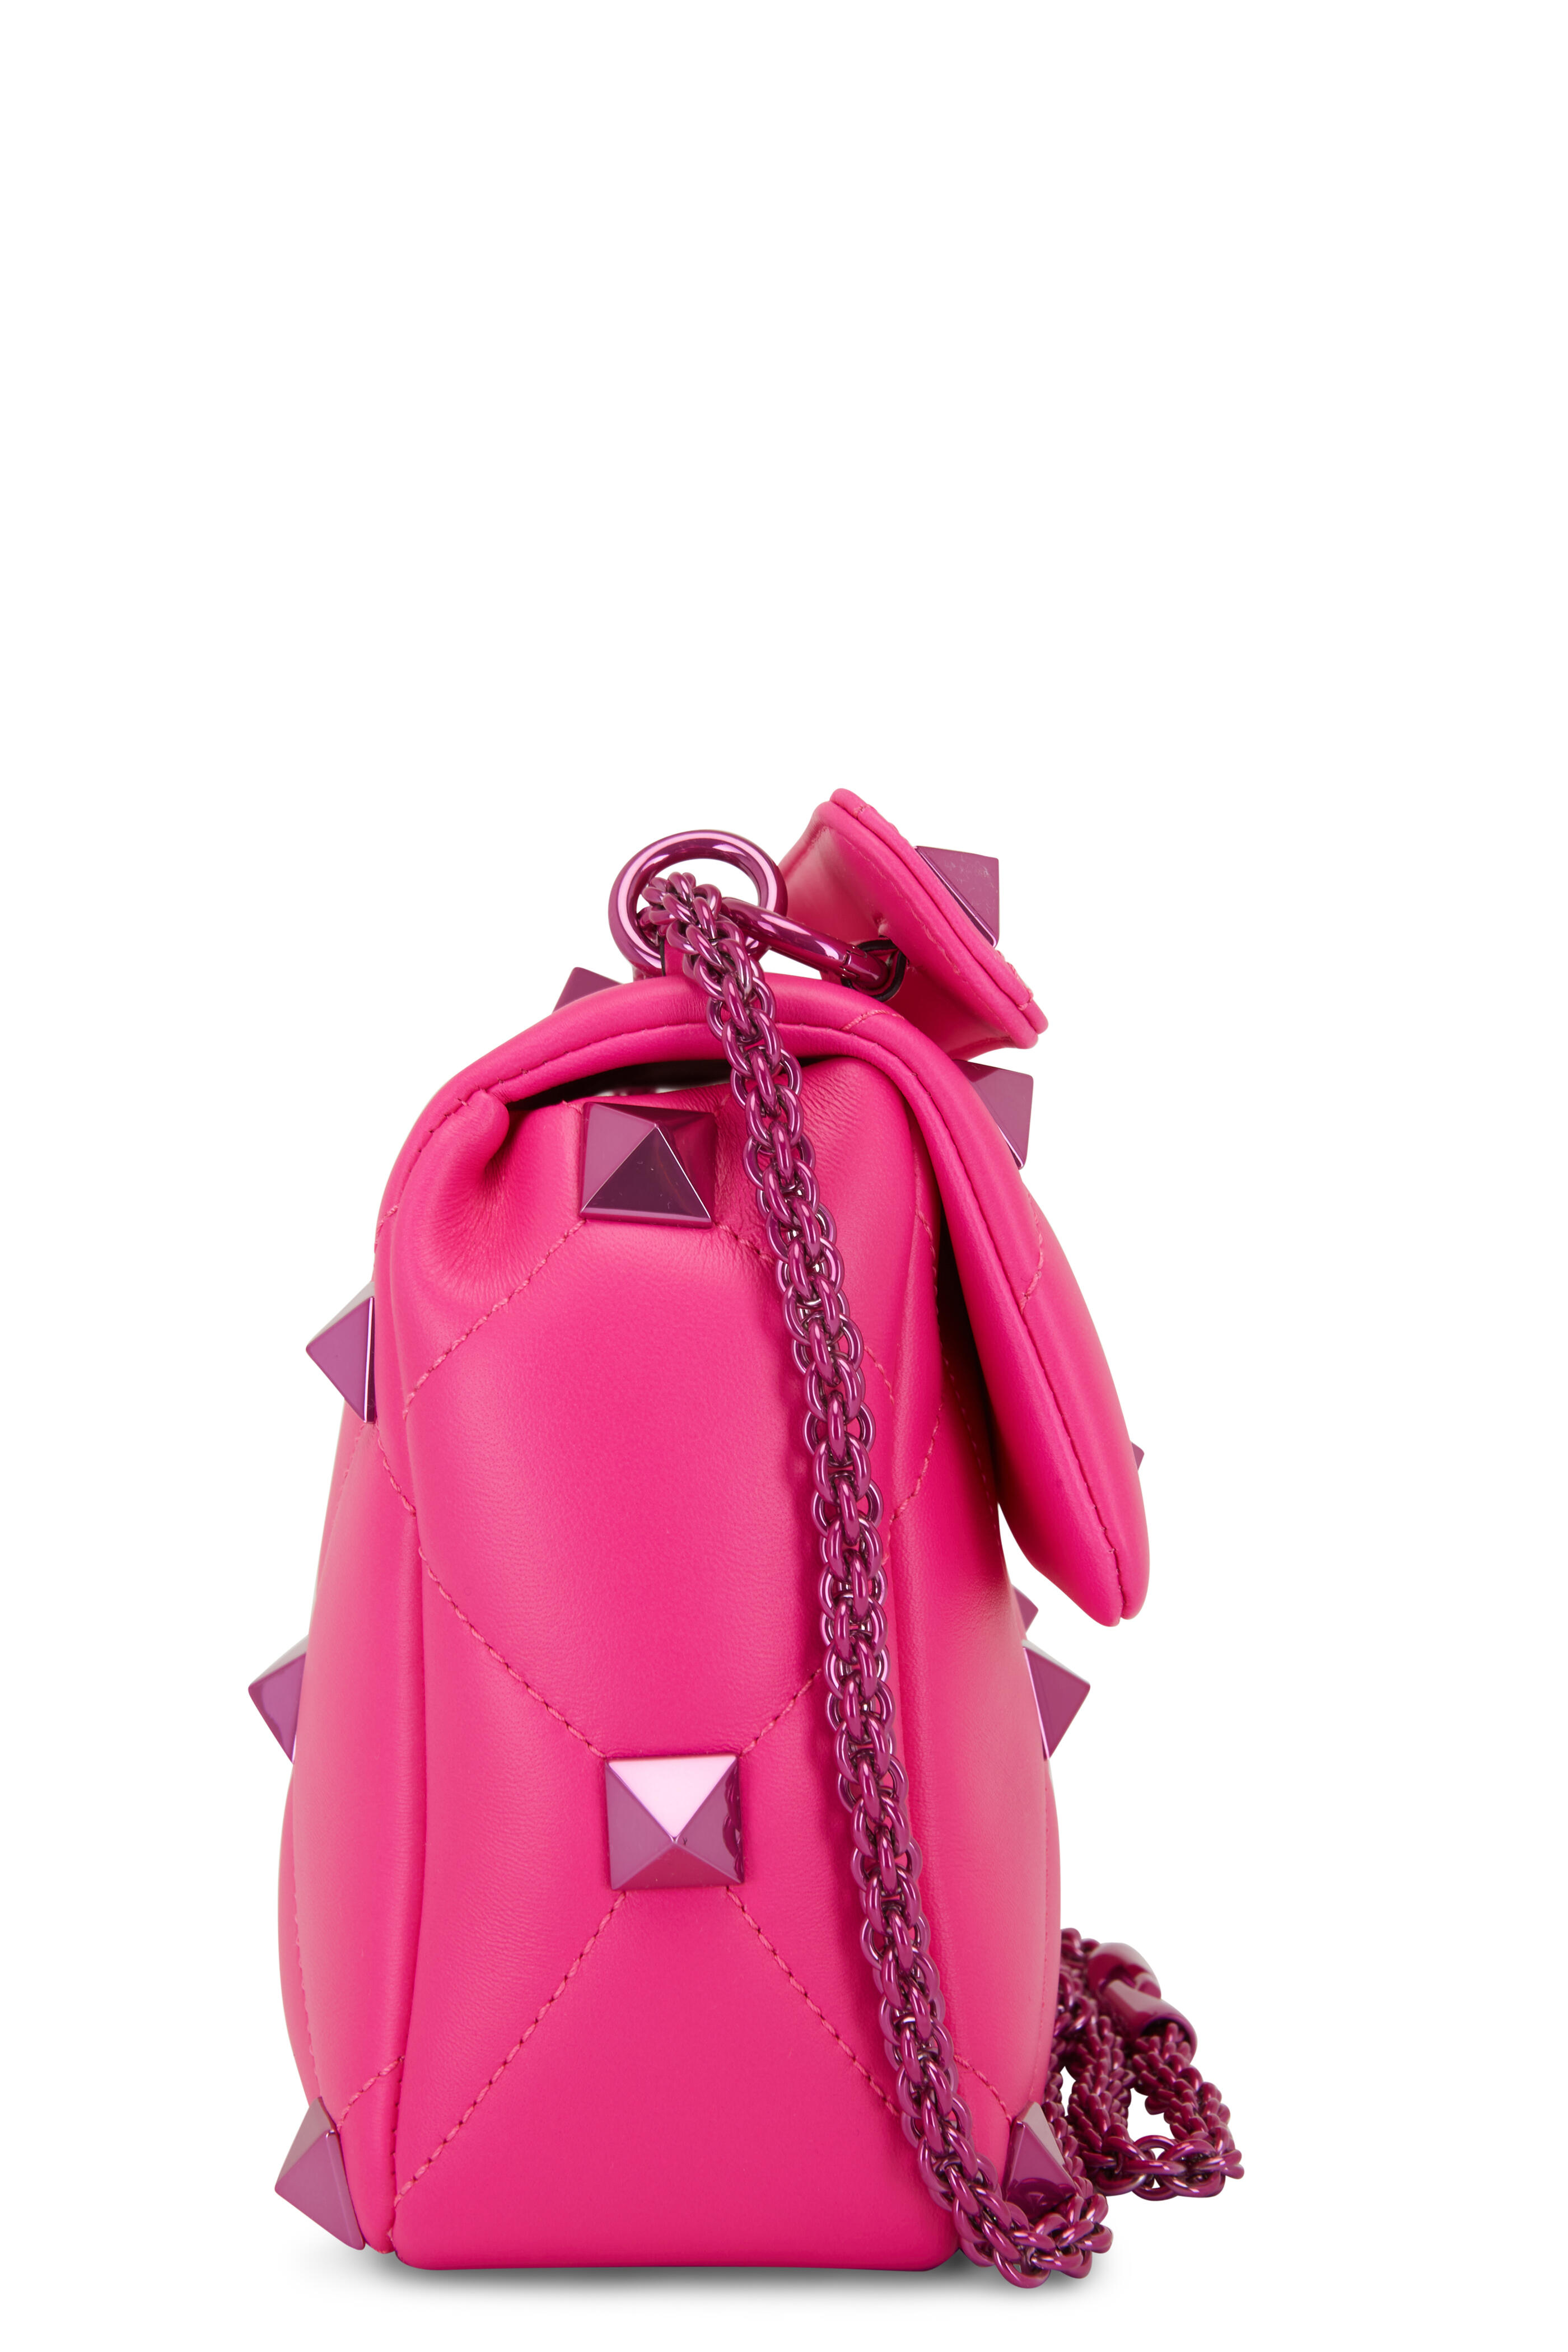 Hot Pink Valentino Bag - How to Wear and Where to Buy